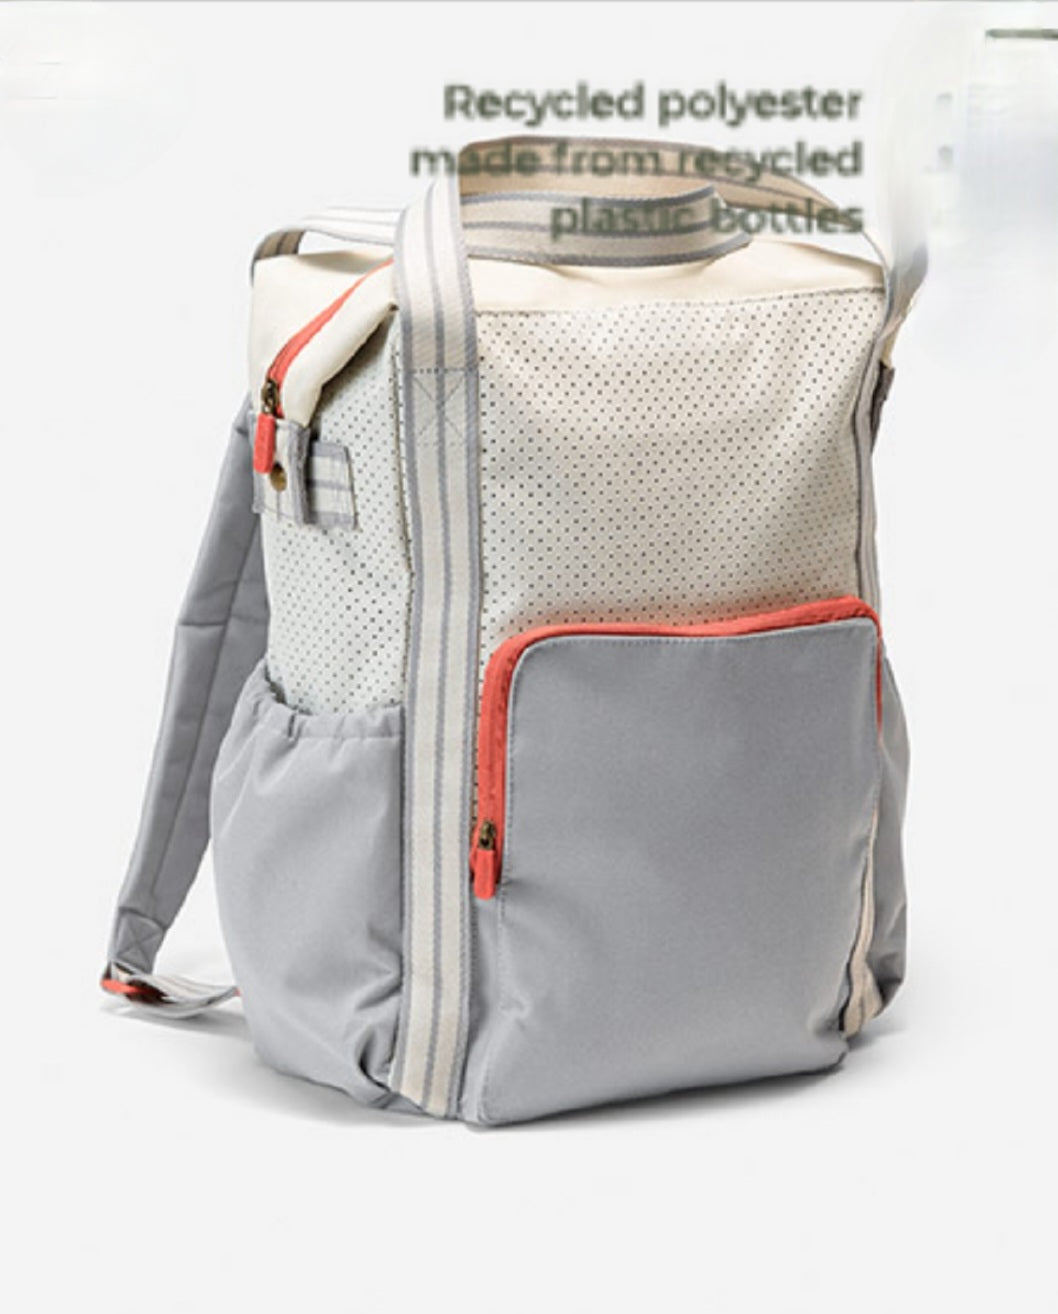 My new pride and joy, the white damier spray 2022 racer backpack